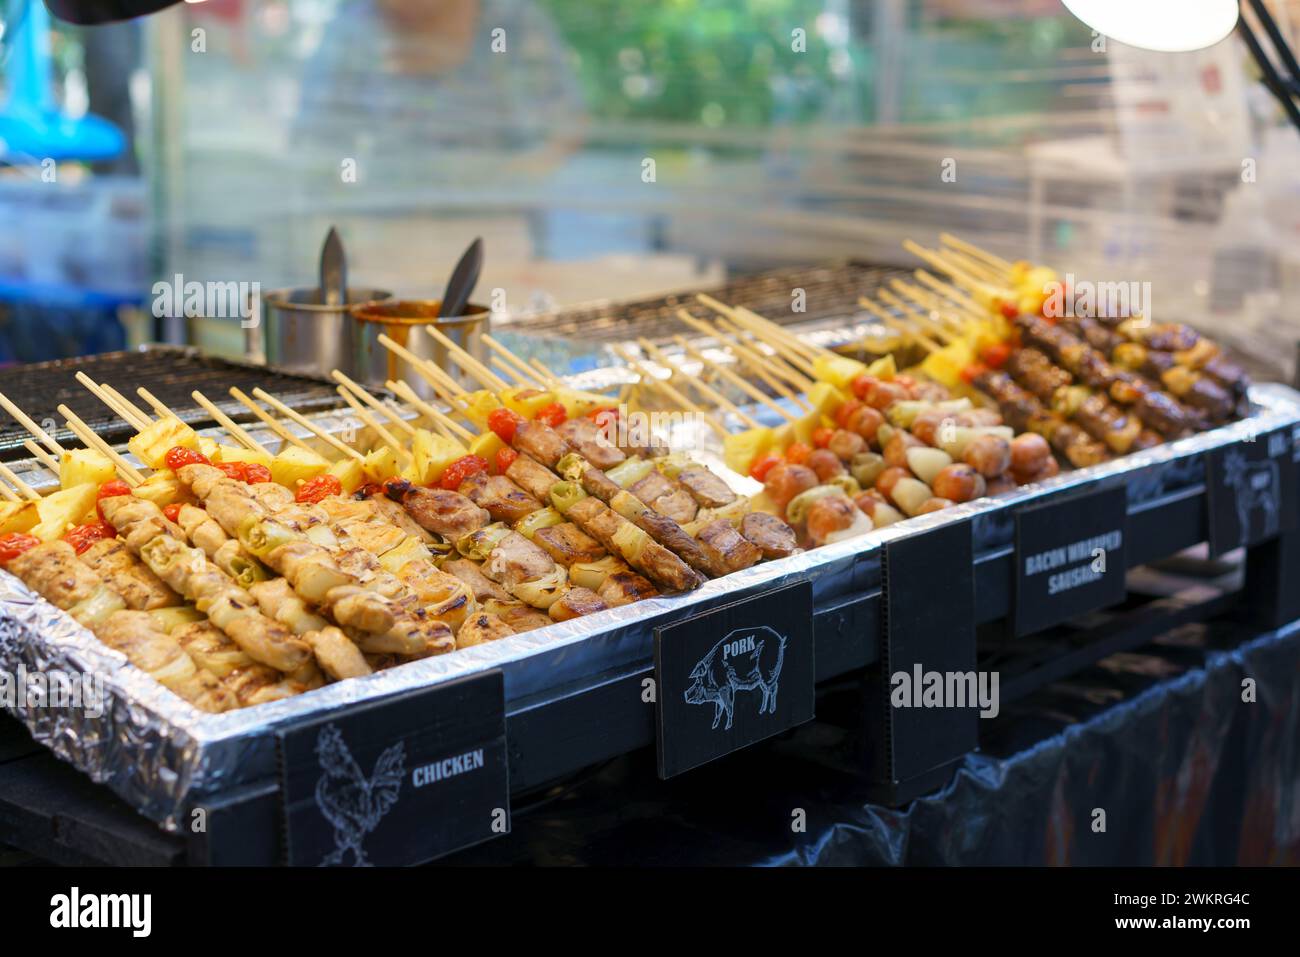 An appetizing array of grilled skewers featuring chicken, pork, and bacon-wrapped sausages, accompanied by vegetables, displayed at a street food stan Stock Photo